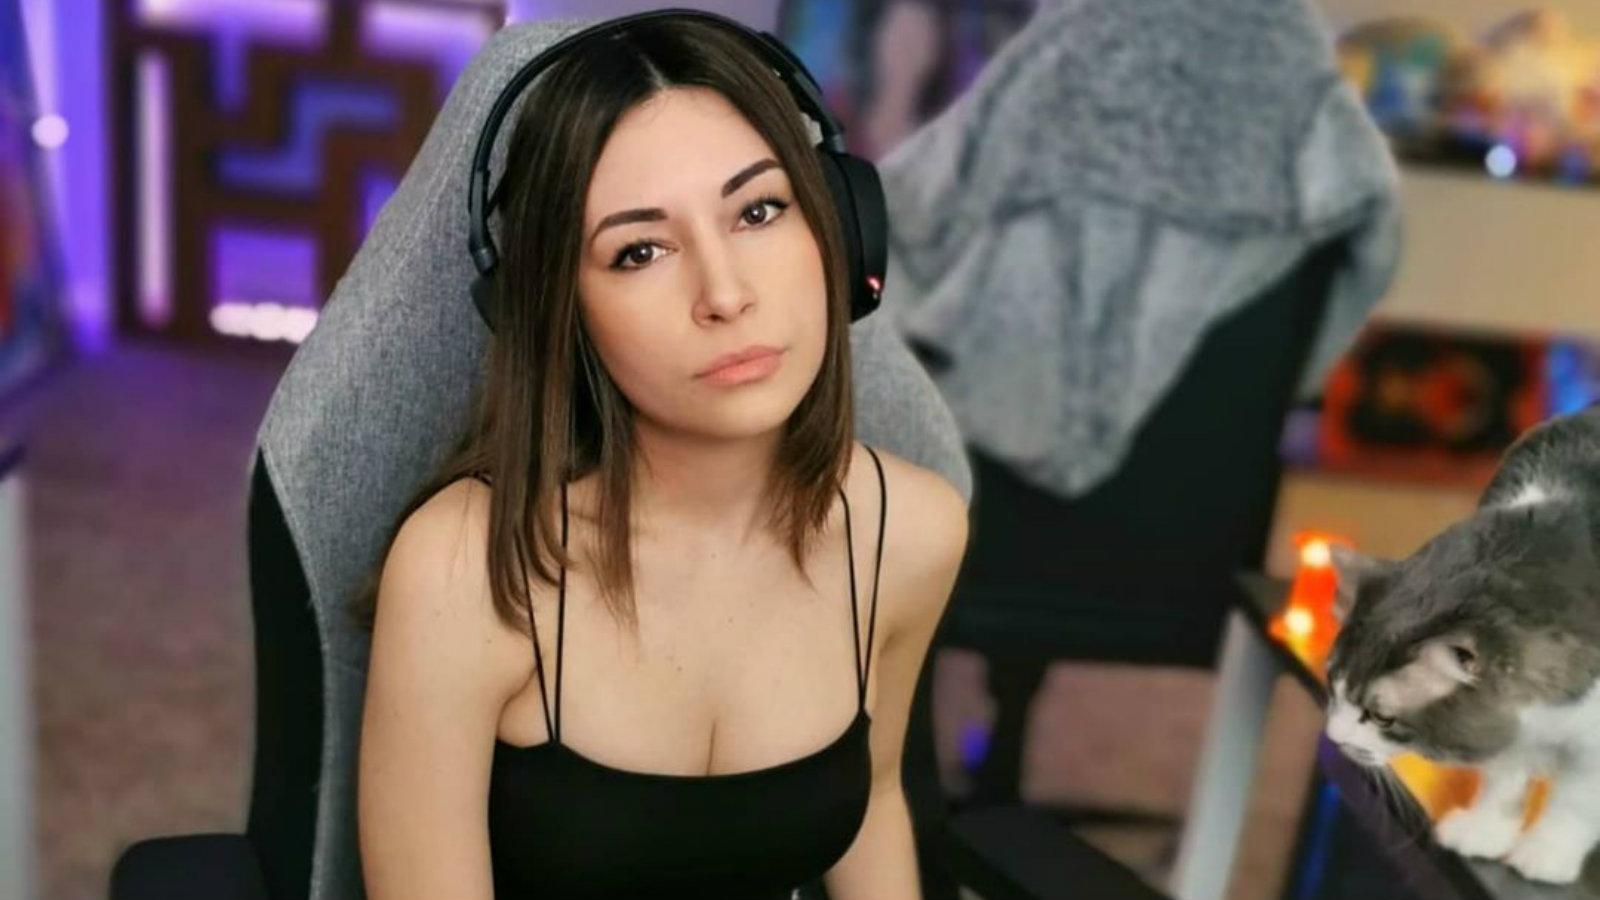 Twitch Bans Accusations Of “sexual Favors” Between Streamers And Staff